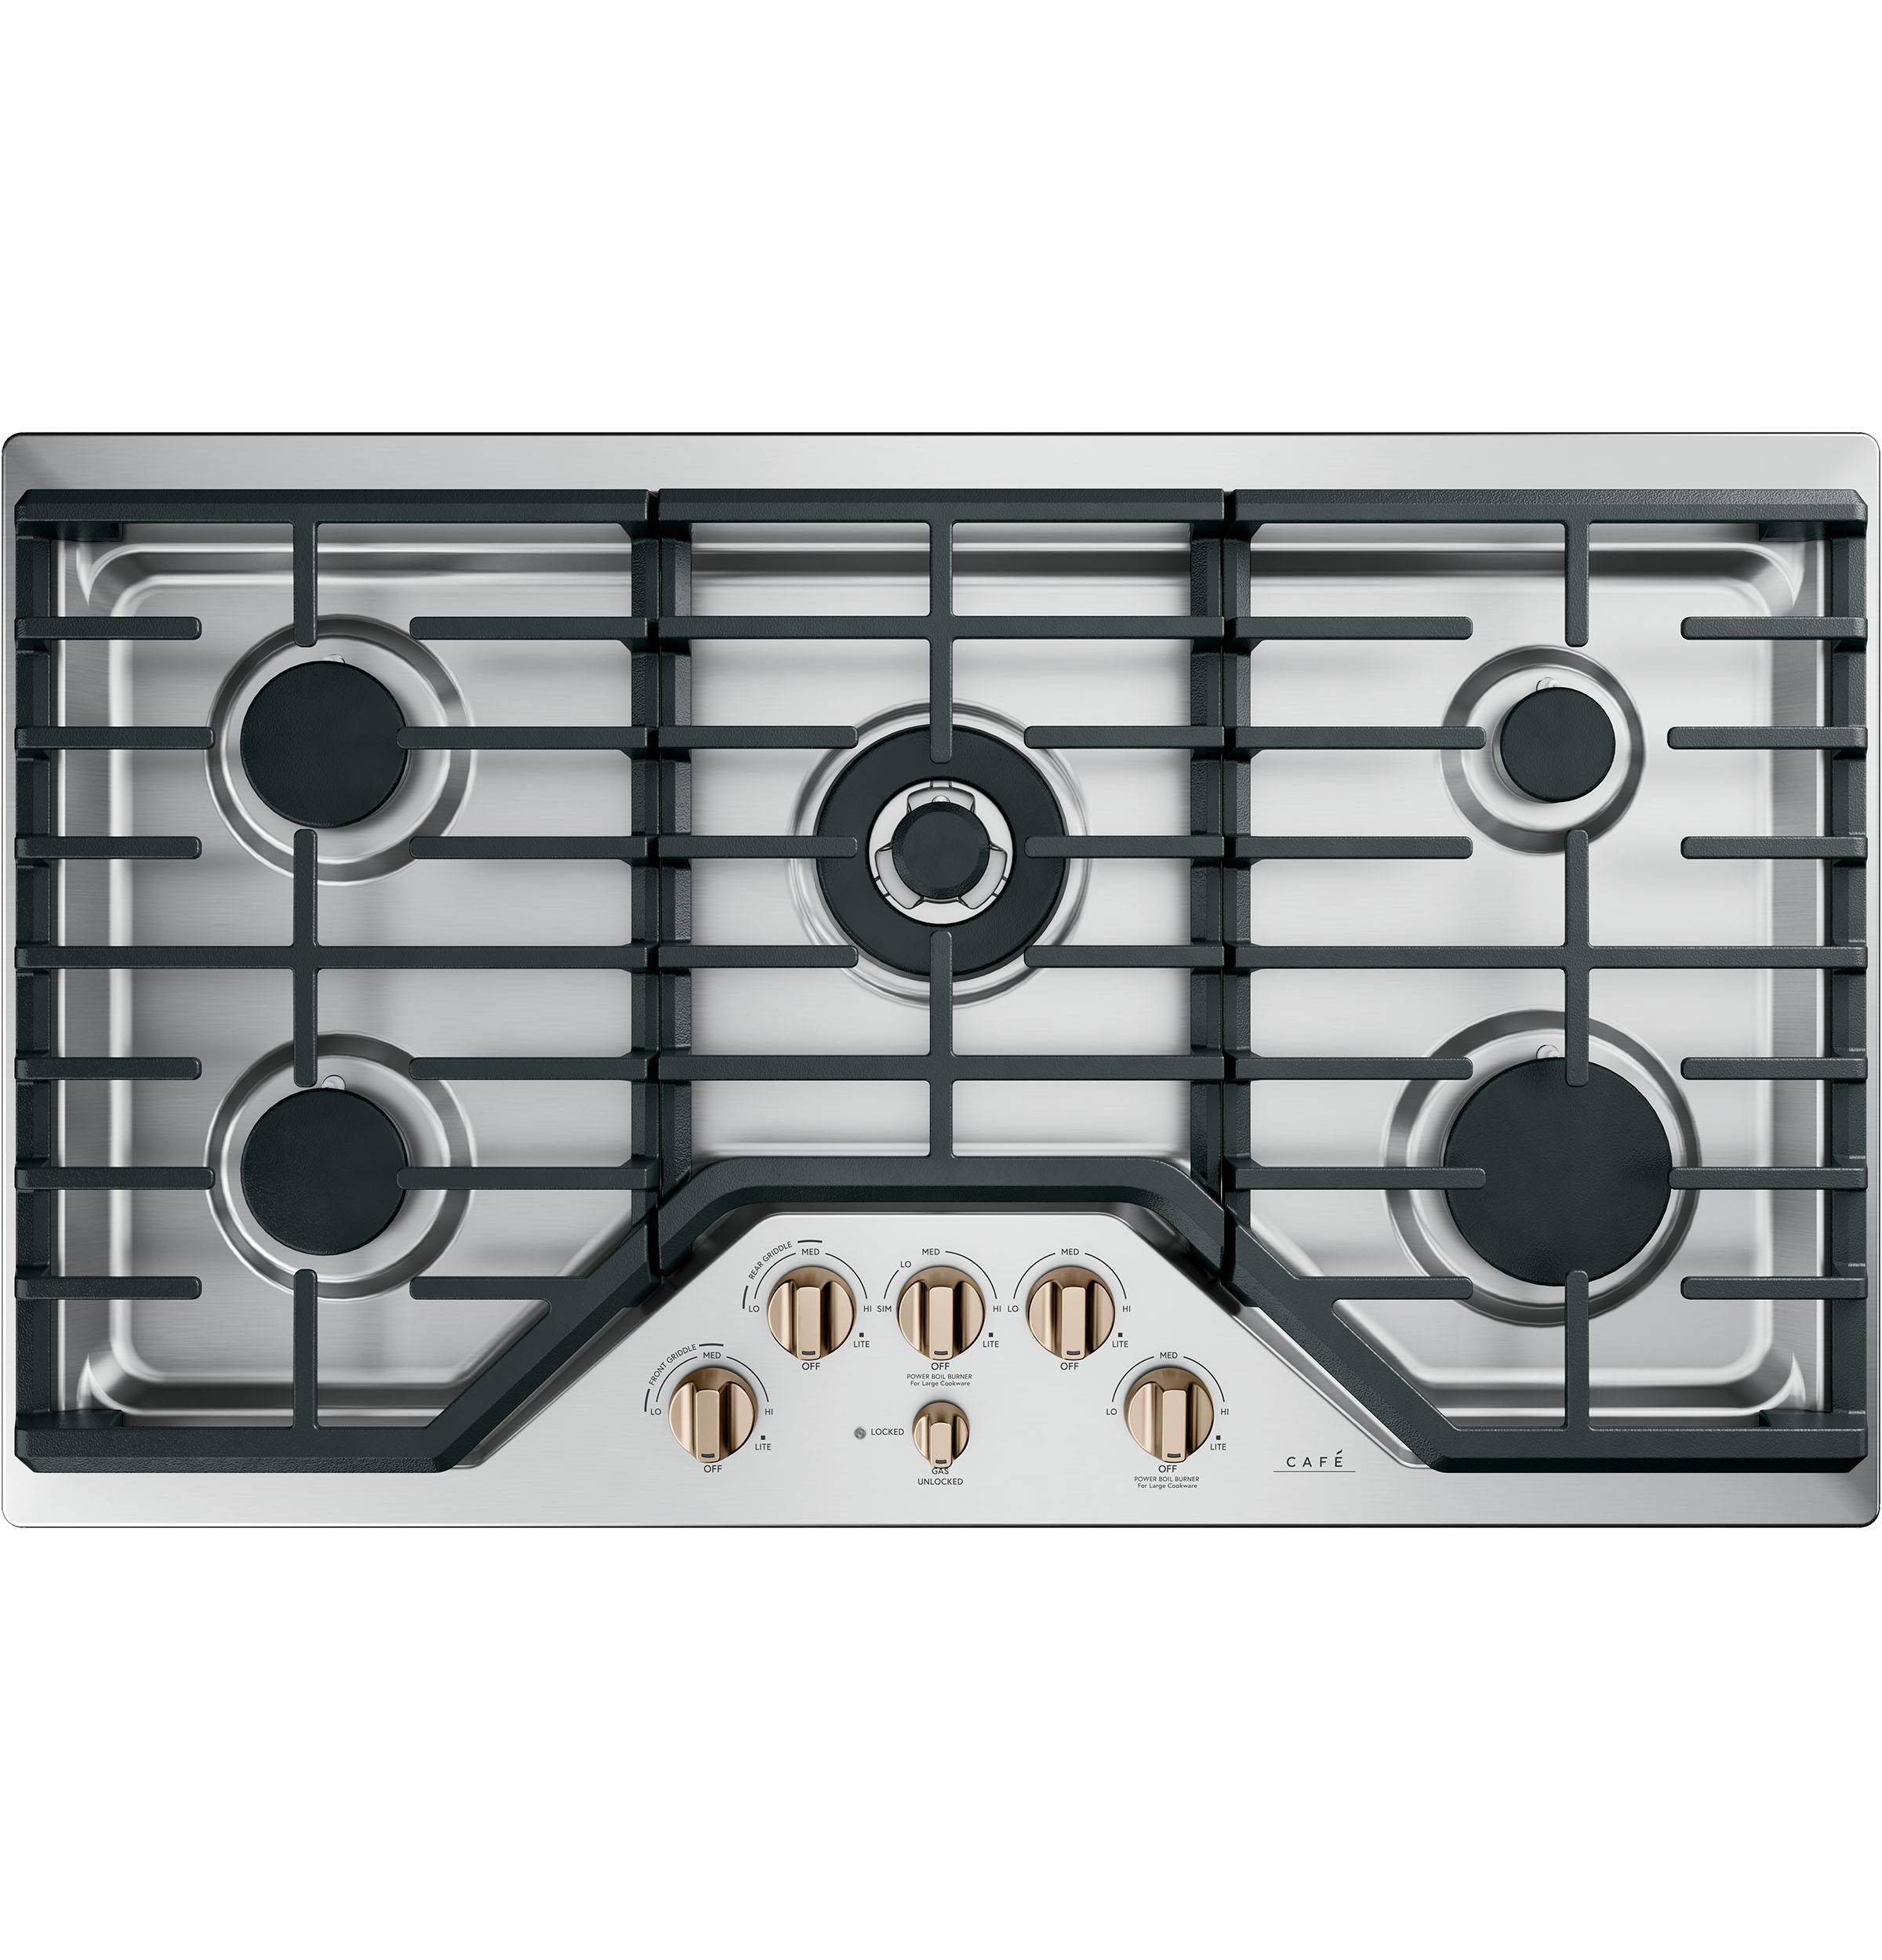 Cafe Café™ 36" Built-In Gas Cooktop (Stainless Steel)